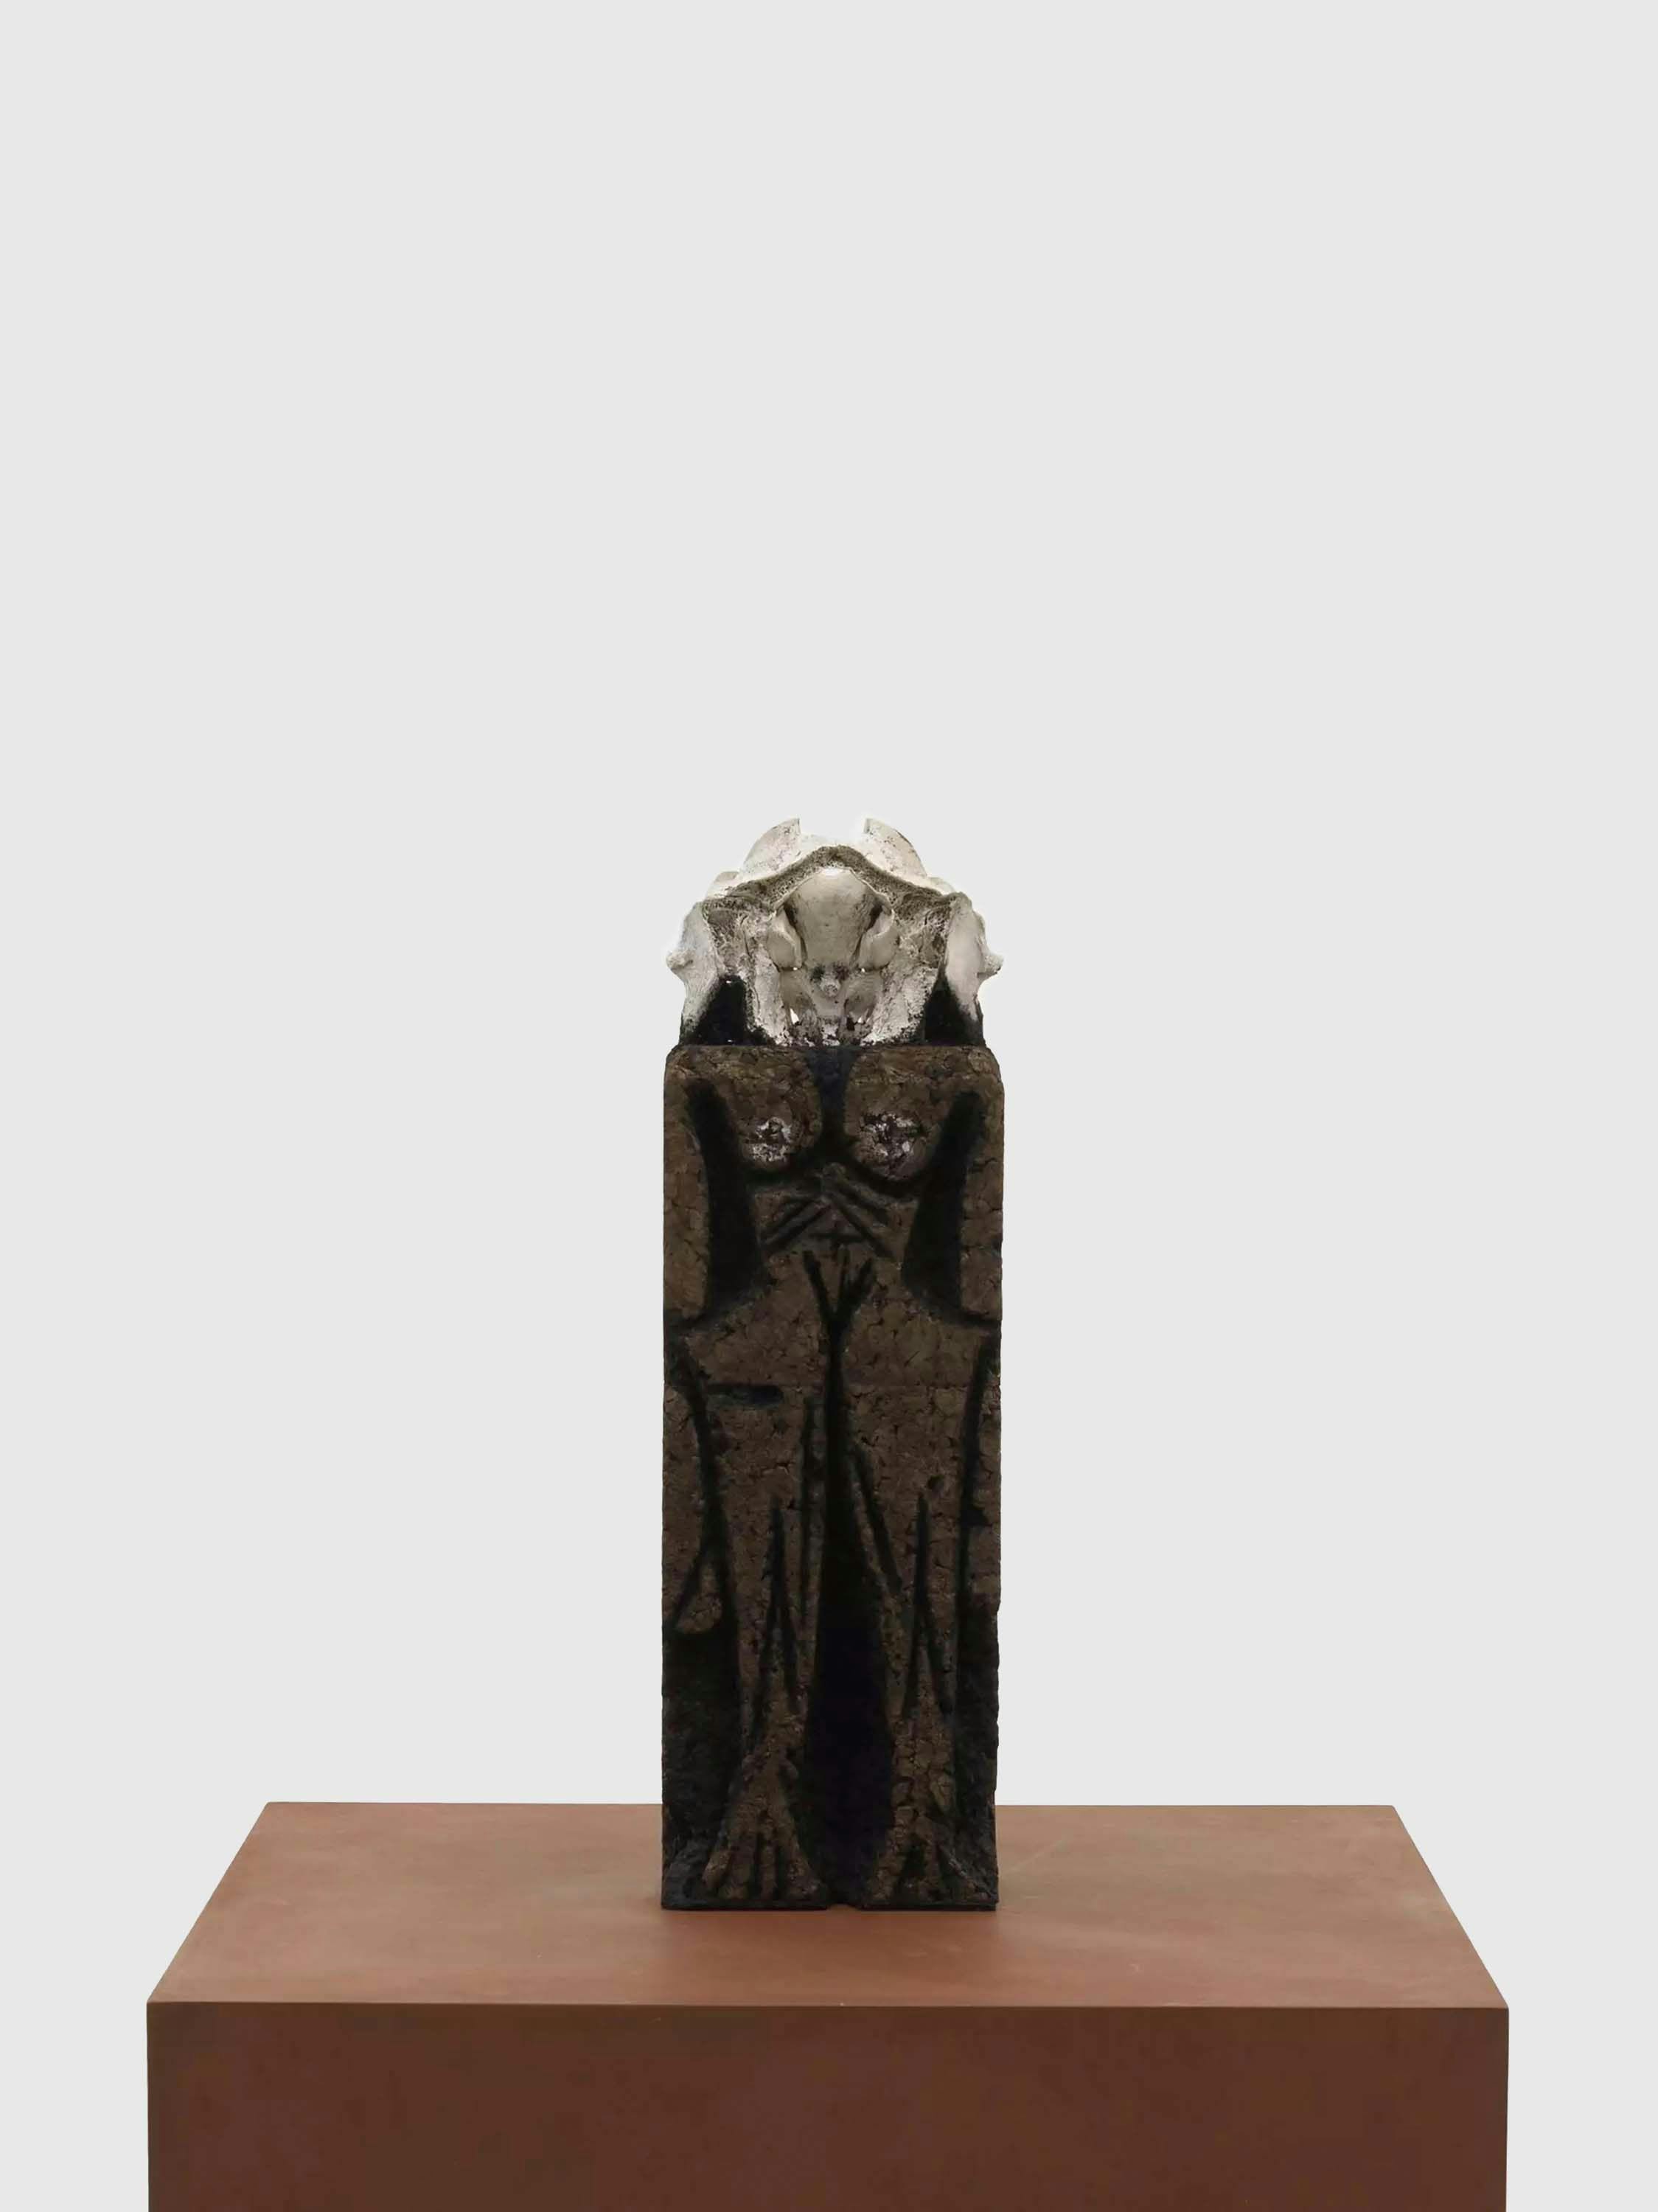 A mixed media artwork by Huma Bhabha, titled Everything is True, dated 2021.